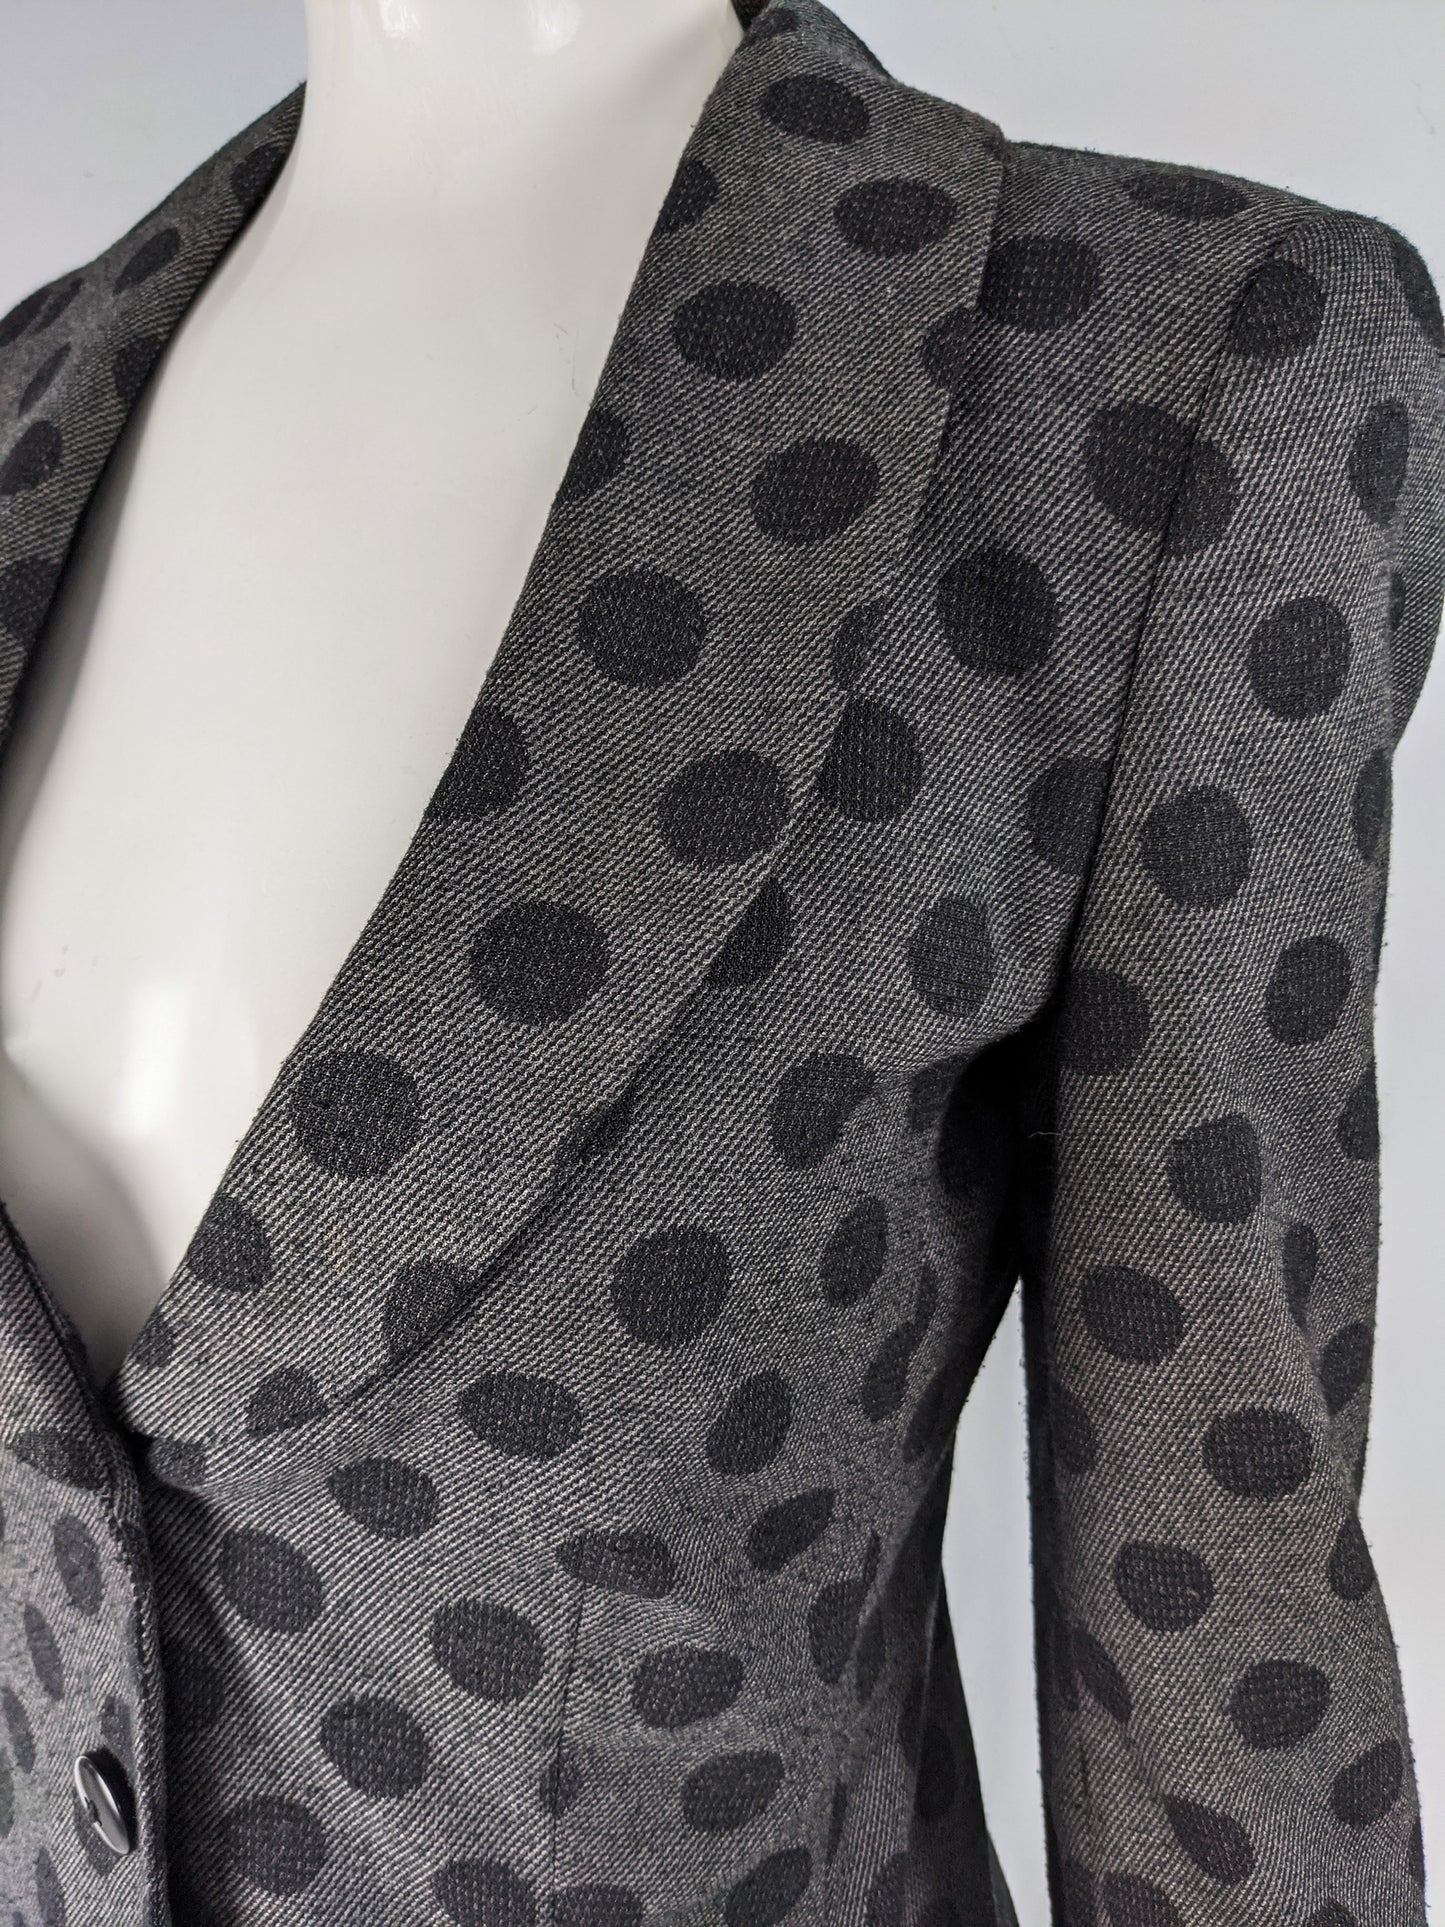 Womens Preowned Polka Dot Tailored Jacket, A/W 2012